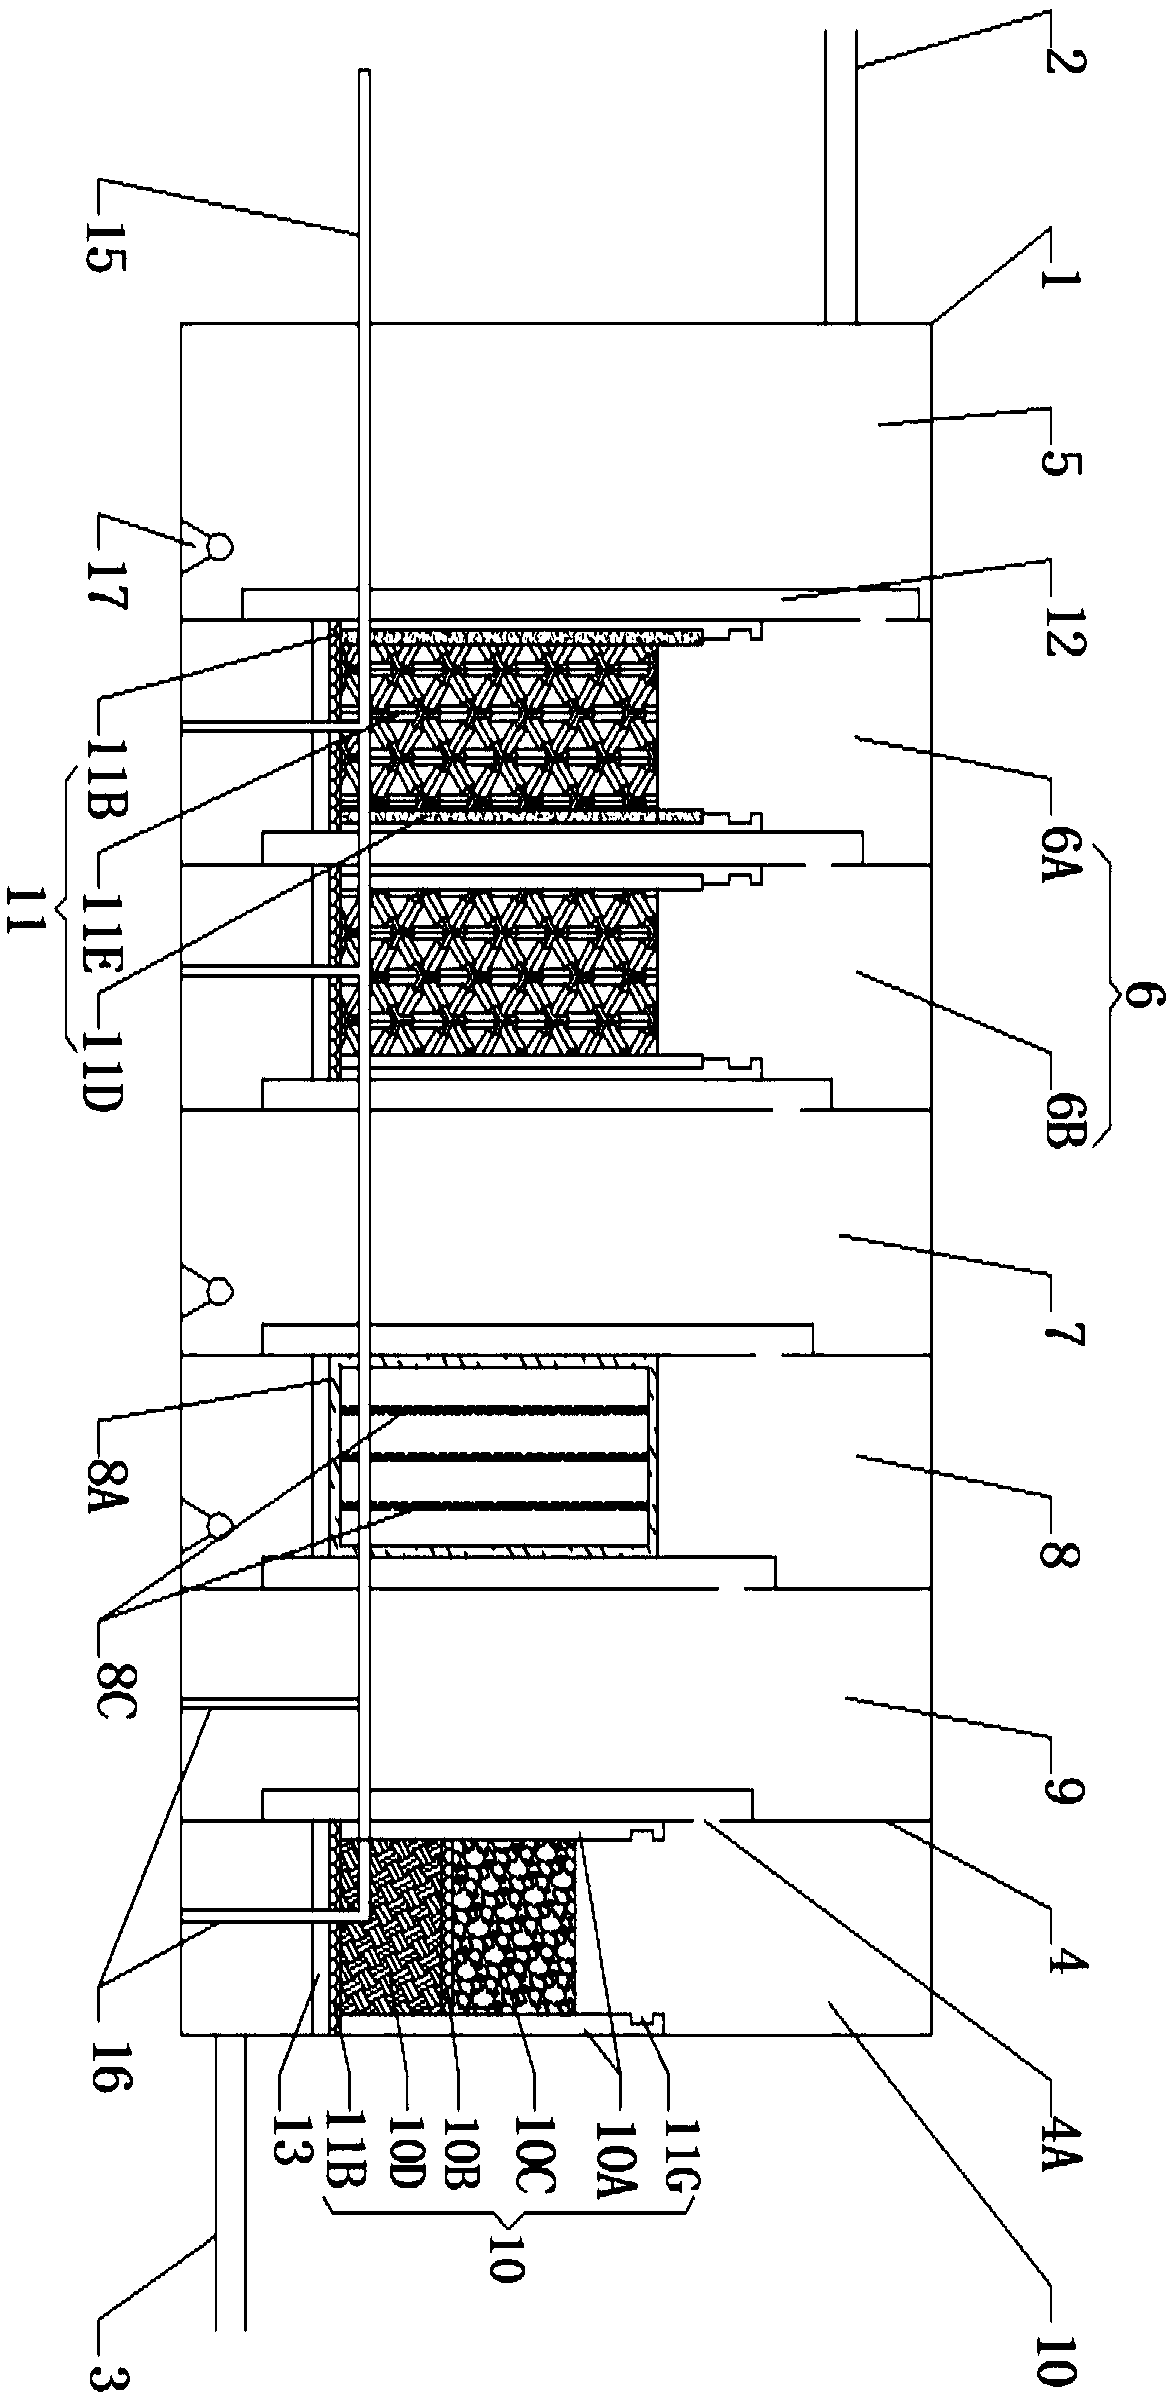 Integrated fumaric acid wastewater treatment device